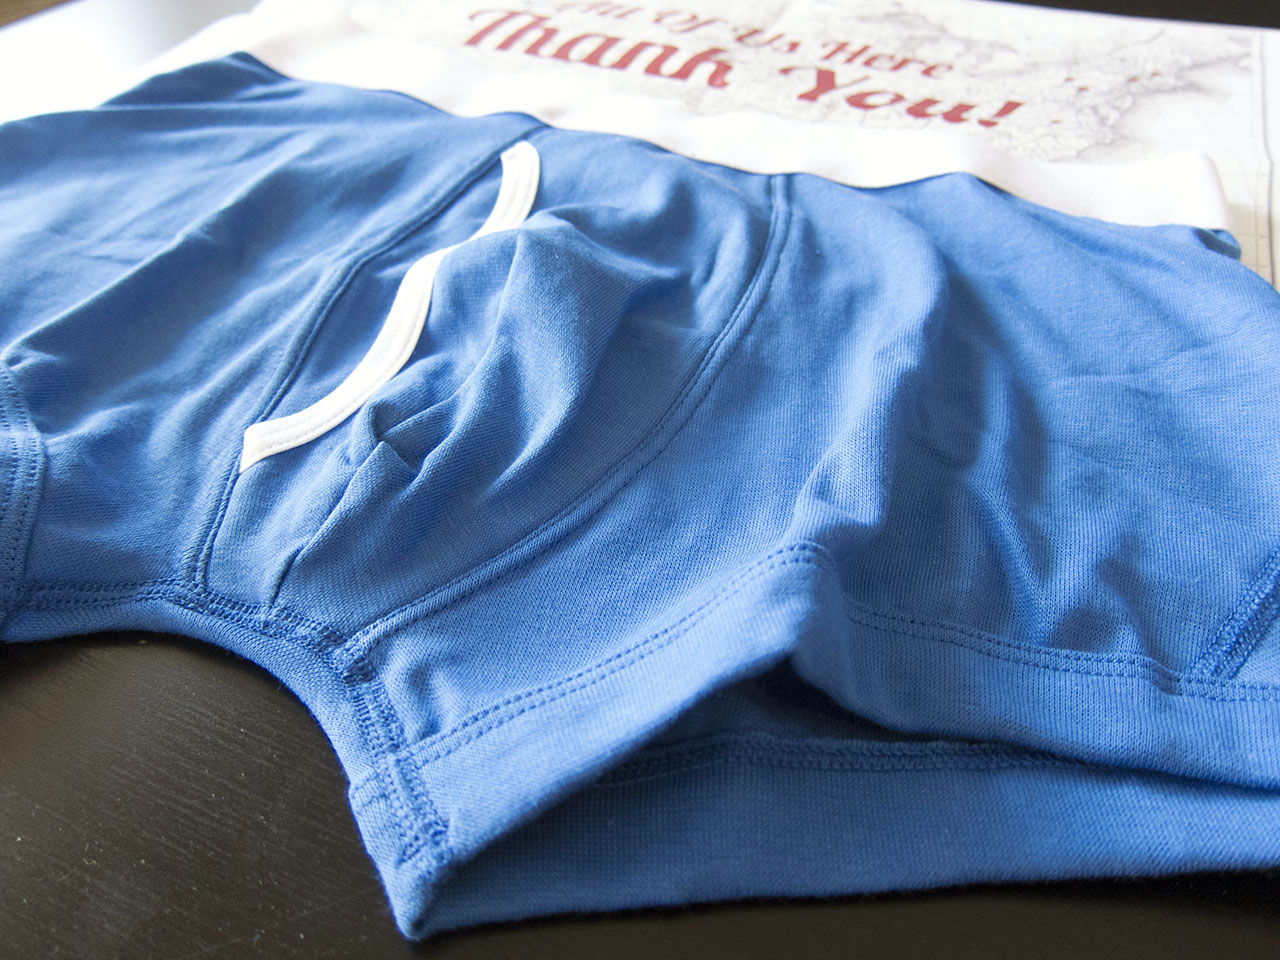 Flint And Tinder Underwear Review: Hands On - Are They Any Good?